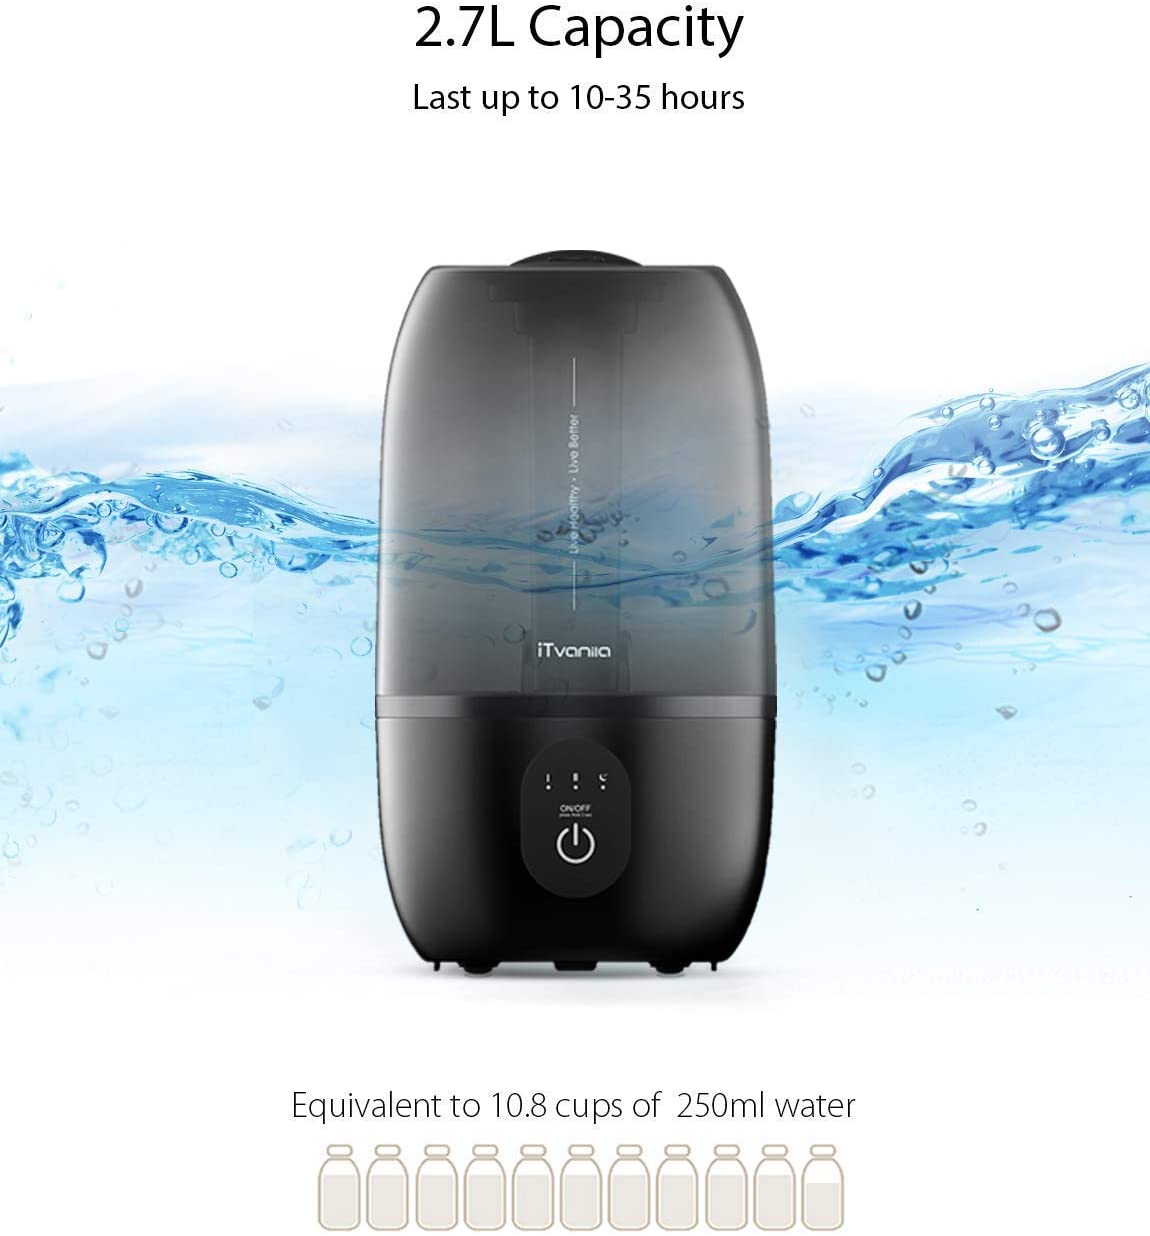 iTvanila -Cool Mist Humidifier 2.7L/0.7Gal Quiet Touch Operation - 360° Rotating Nozzle HU-C1 Black,  living rooms, nursery room, bedroom, office use humidifier